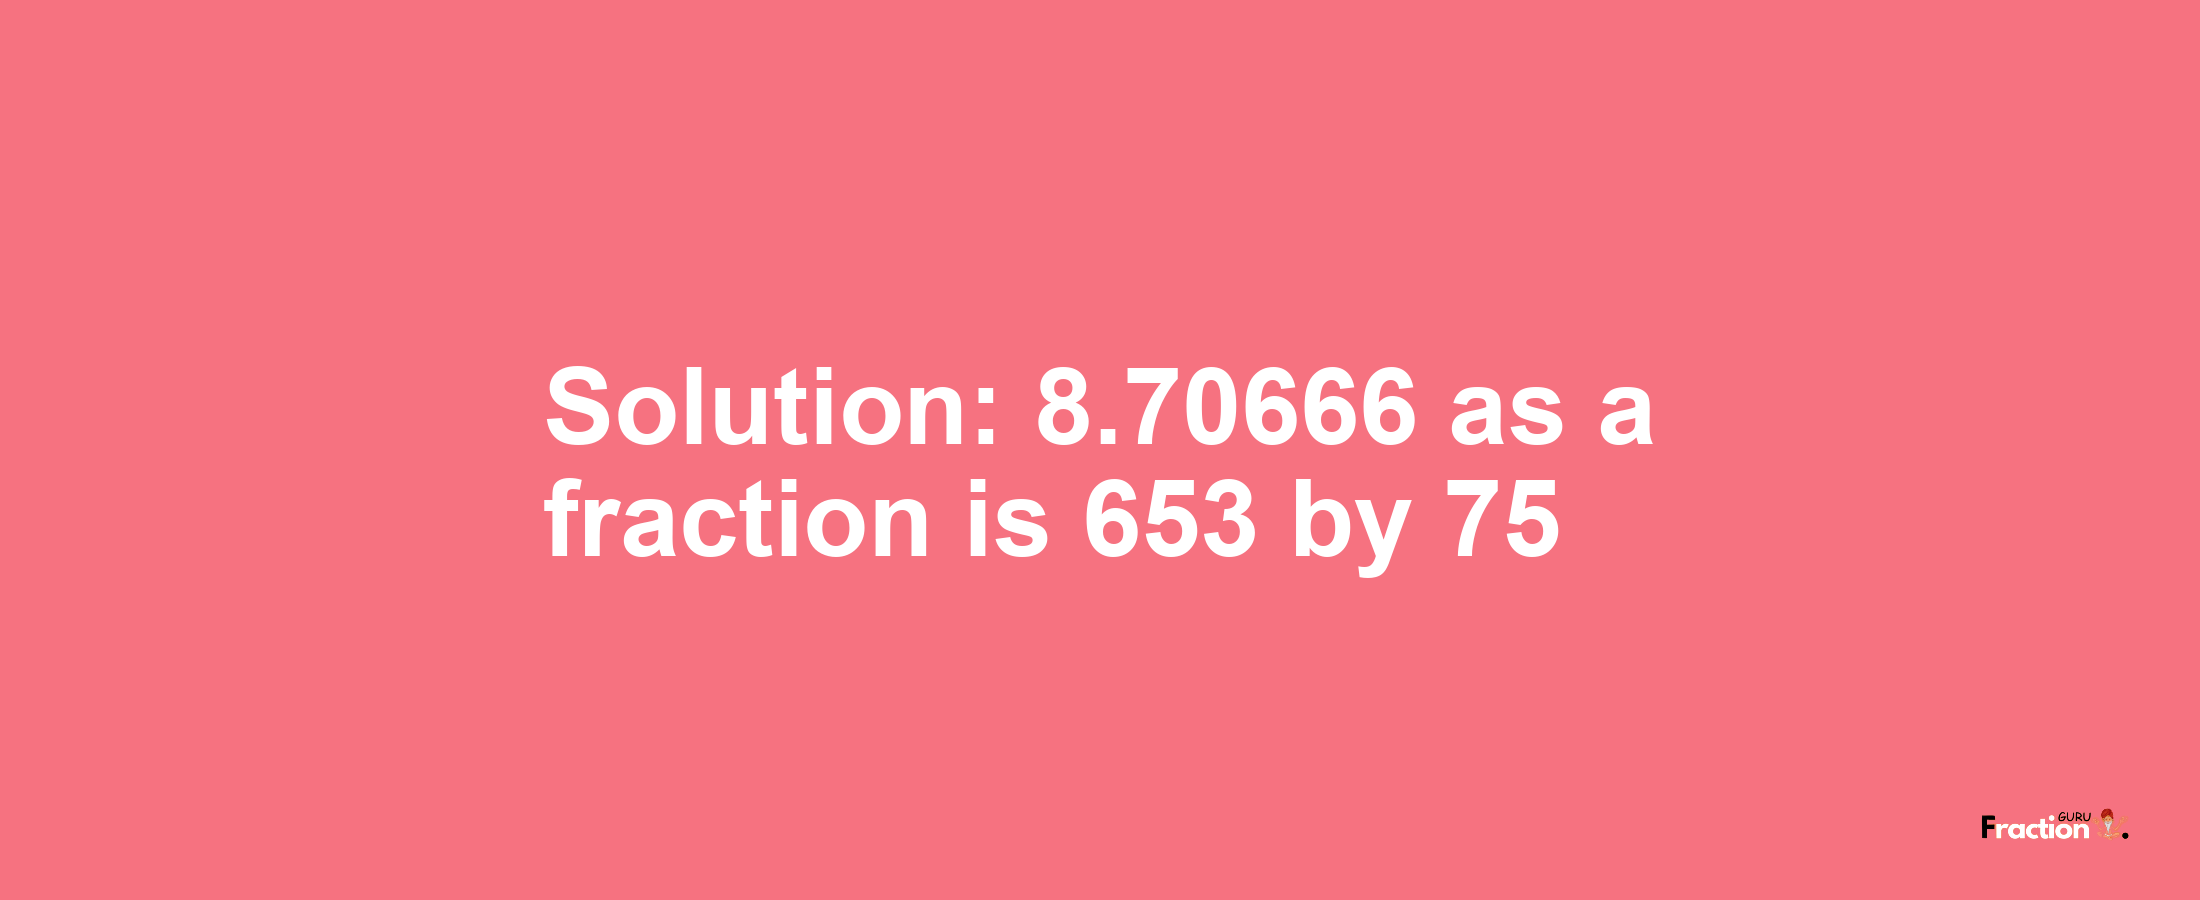 Solution:8.70666 as a fraction is 653/75